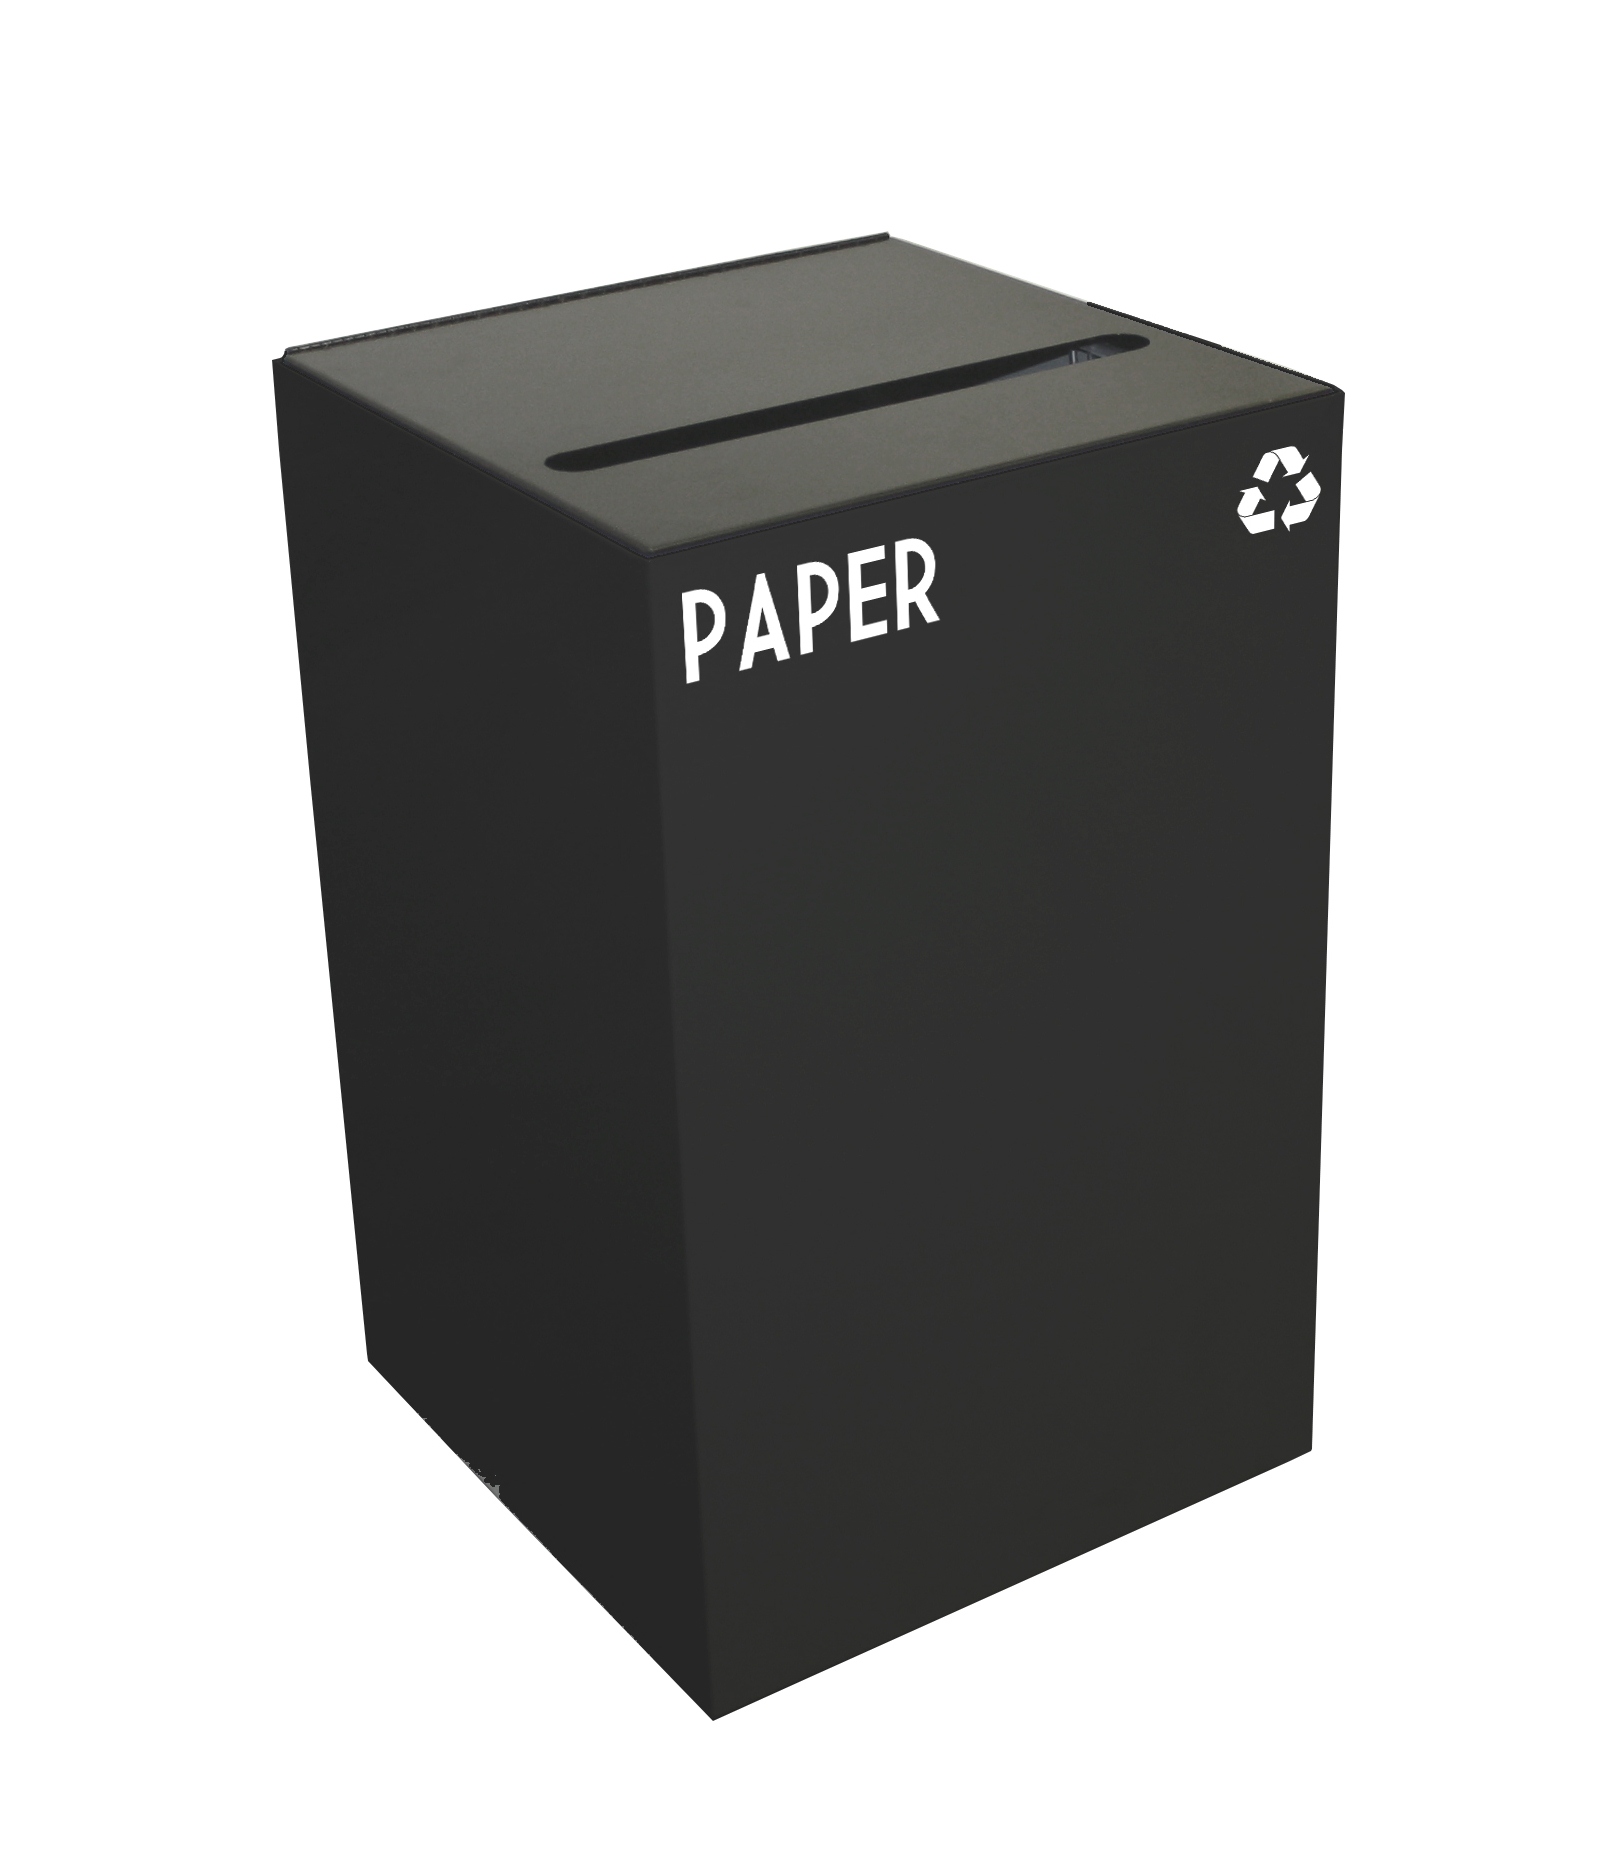 Square Recycling Containers For Paper